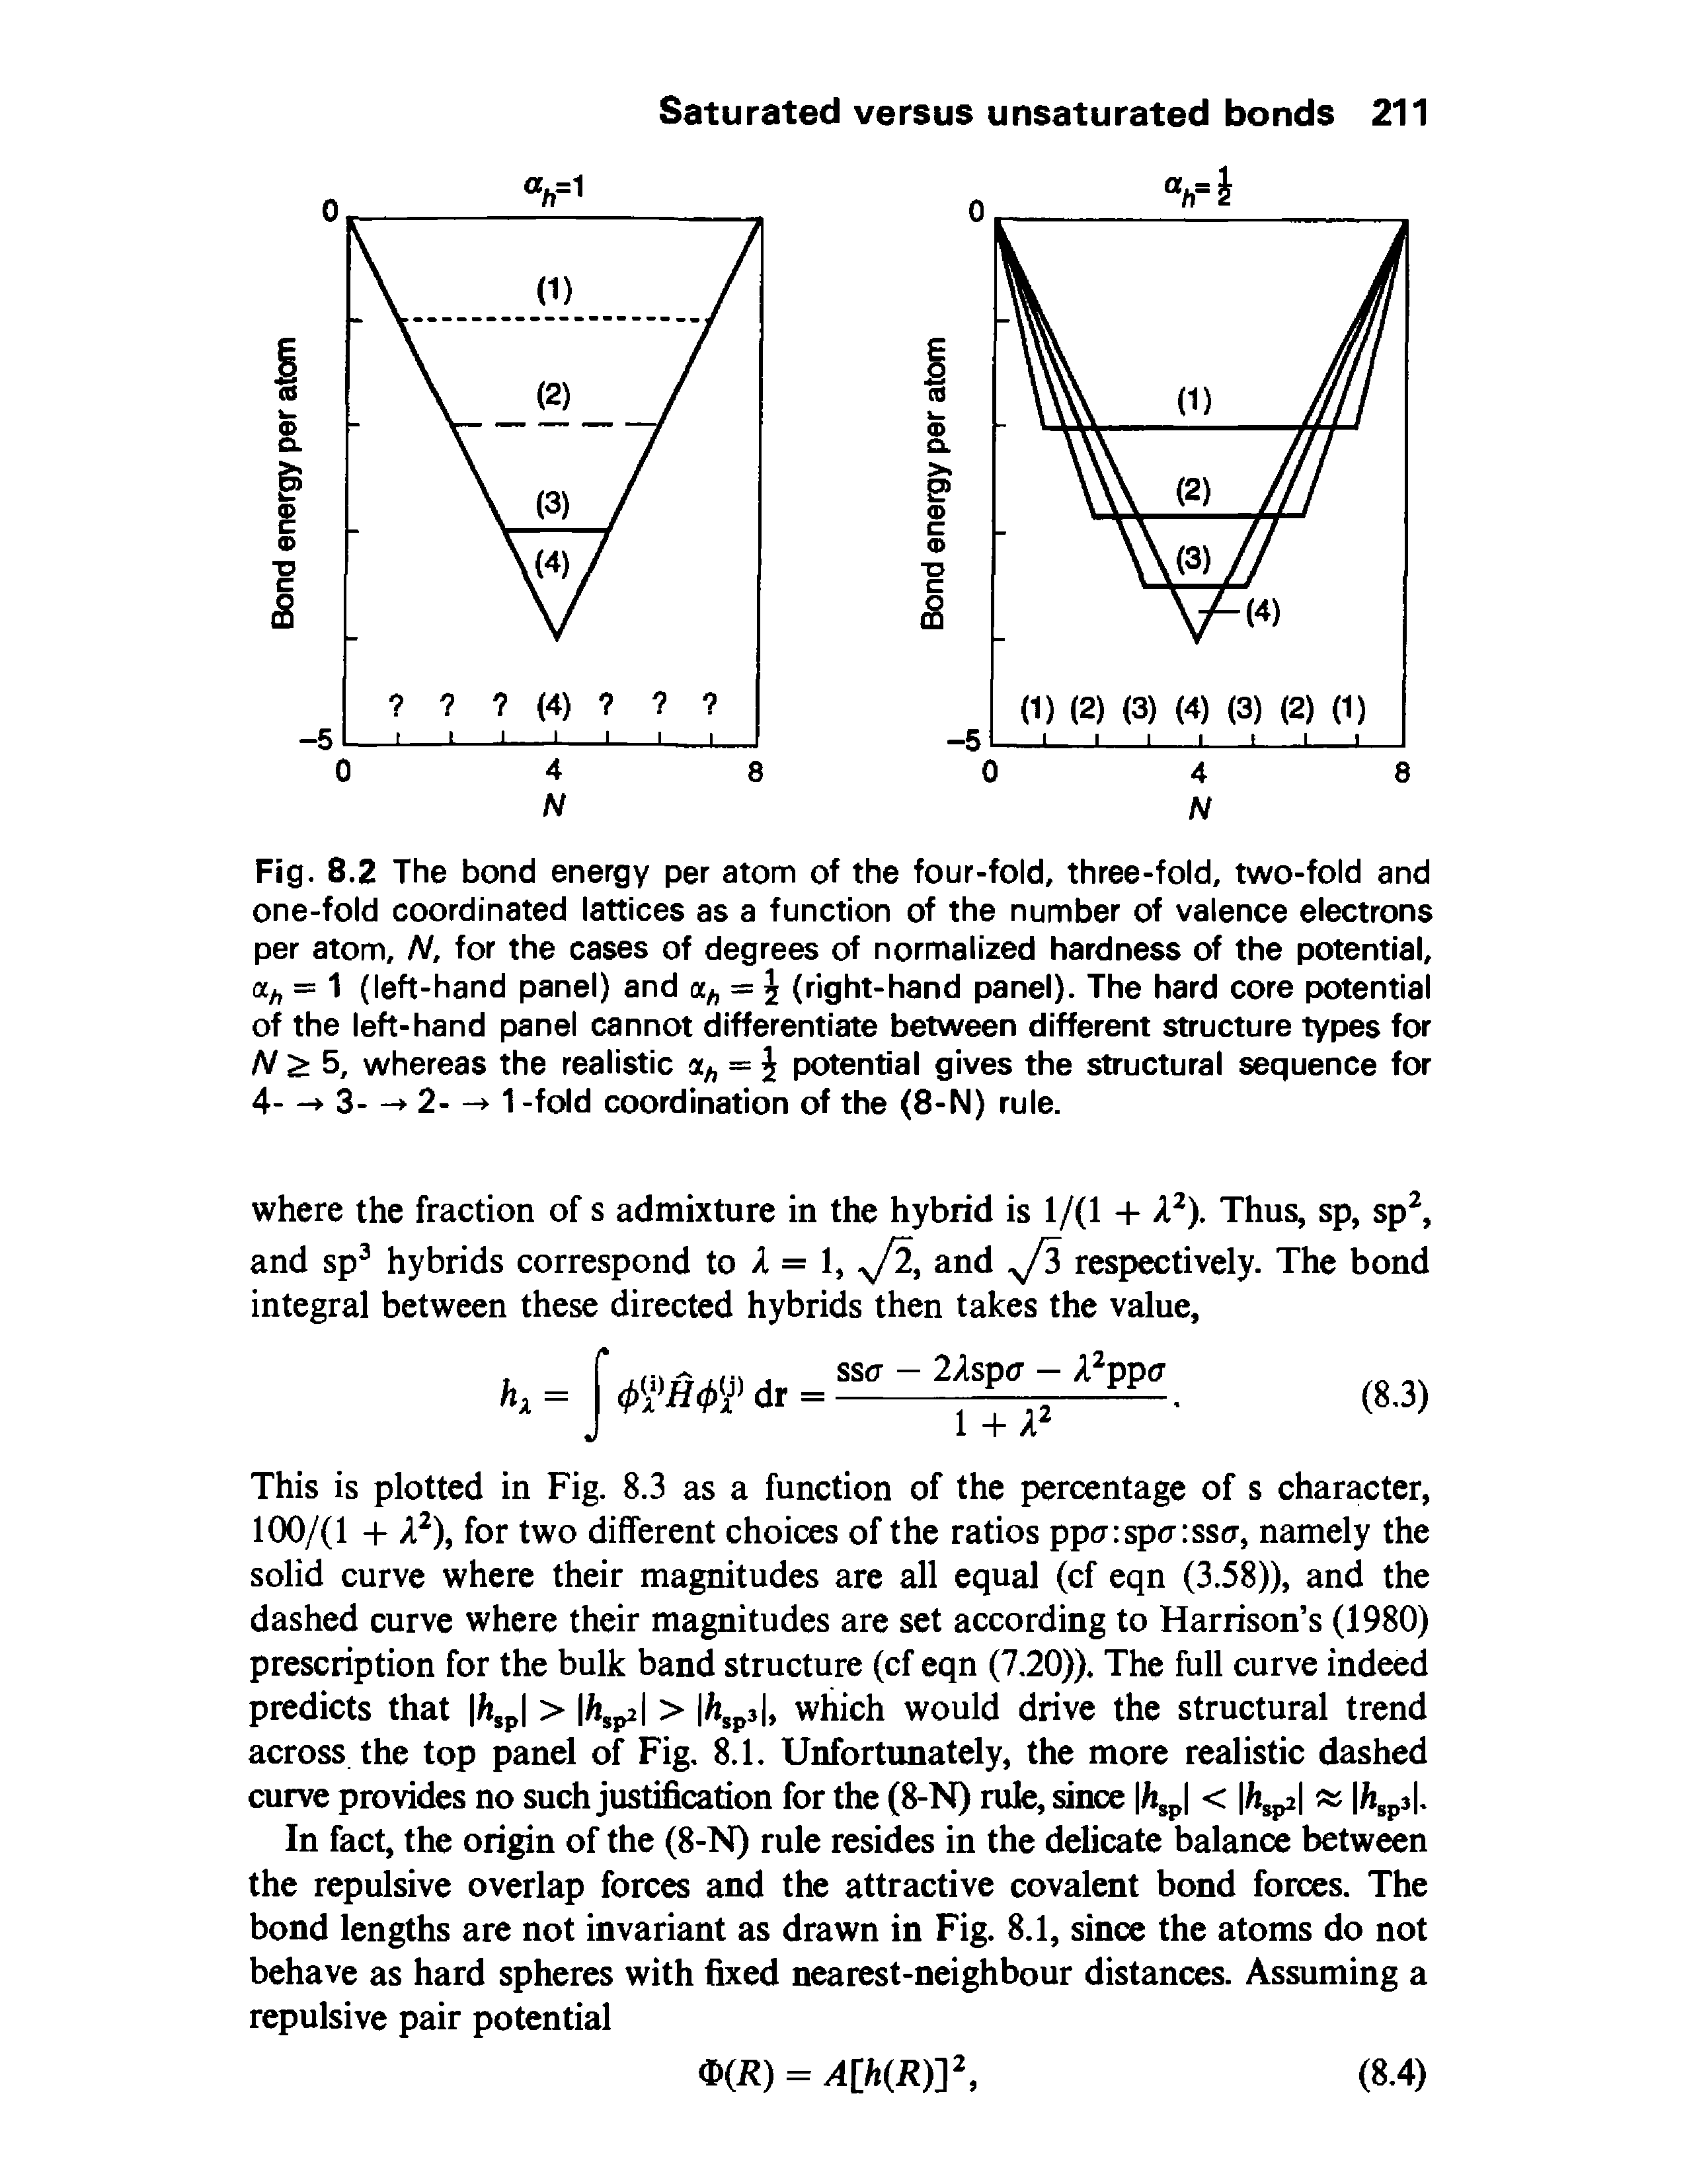 Fig. 8.2 The bond energy per atom of the four-fold, three-fold, two-fold and one-fold coordinated lattices as a function of the number of valence electrons per atom, /V, for the cases of degrees of normalized hardness of the potential, <xh = 1 (left-hand panel) and ah = (right-hand panel). The hard core potential of the left-hand panel cannot differentiate between different structure types for N 5, whereas the realistic = potential gives the structural sequence for 4- -> 3- -> 2- - 1 -fold coordination of the (8-N) rule.